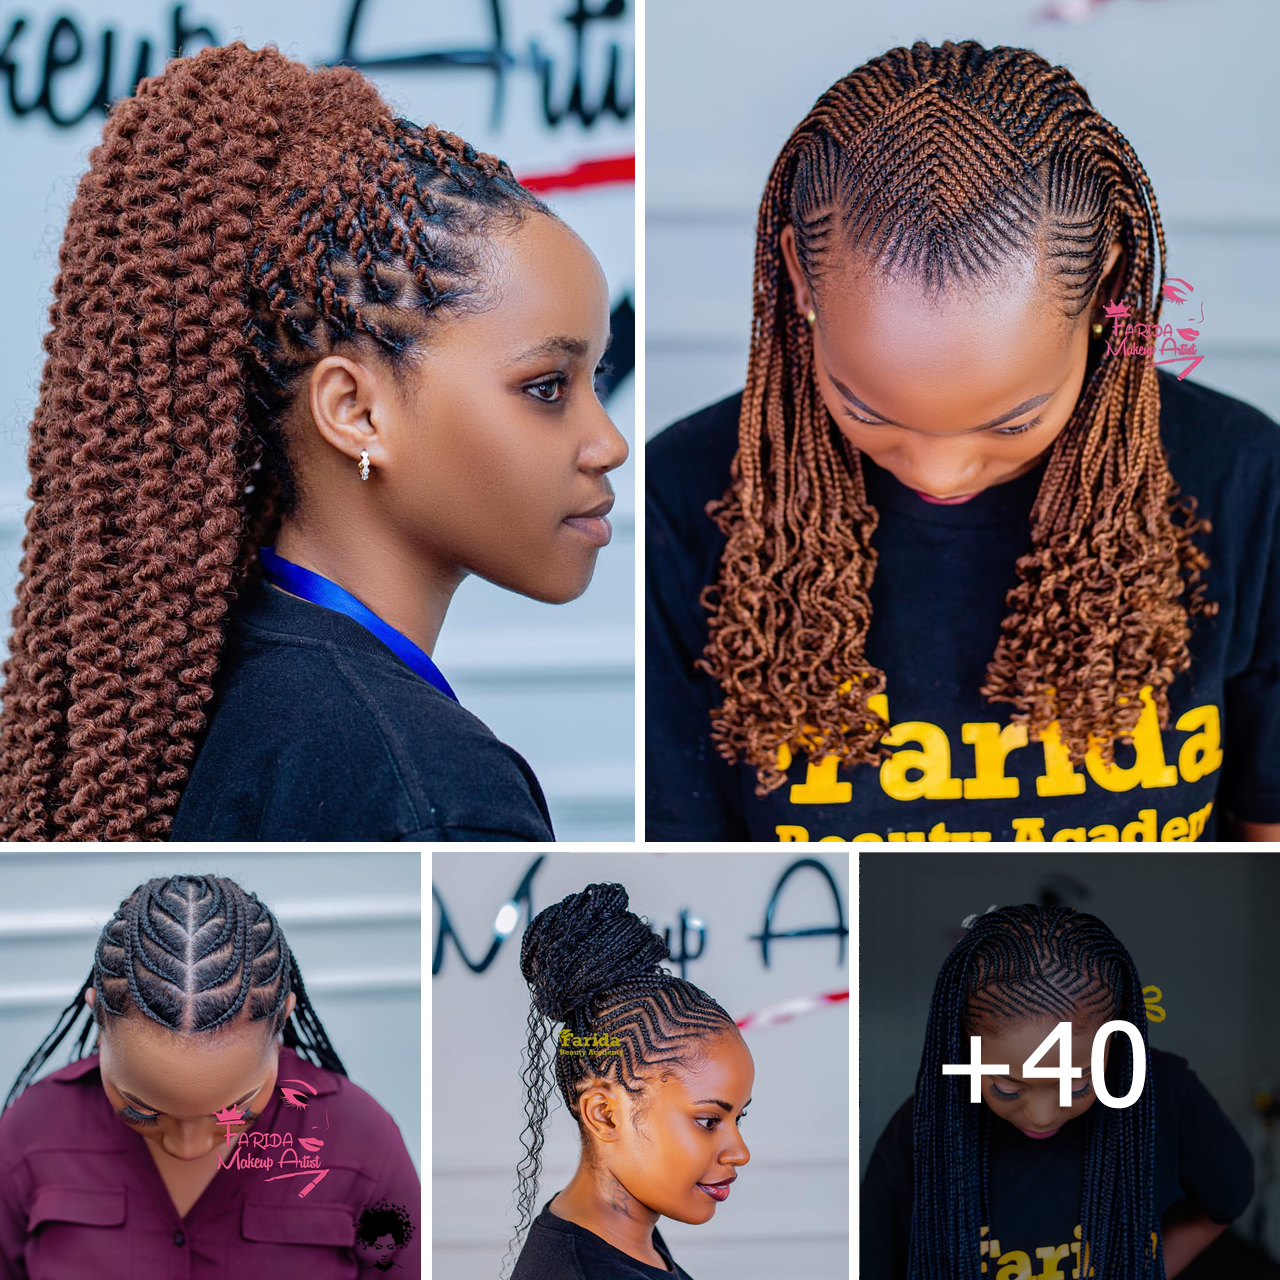 40 Stunning African Braids Hairstyles: Beautiful Ideas for a Fresh Look